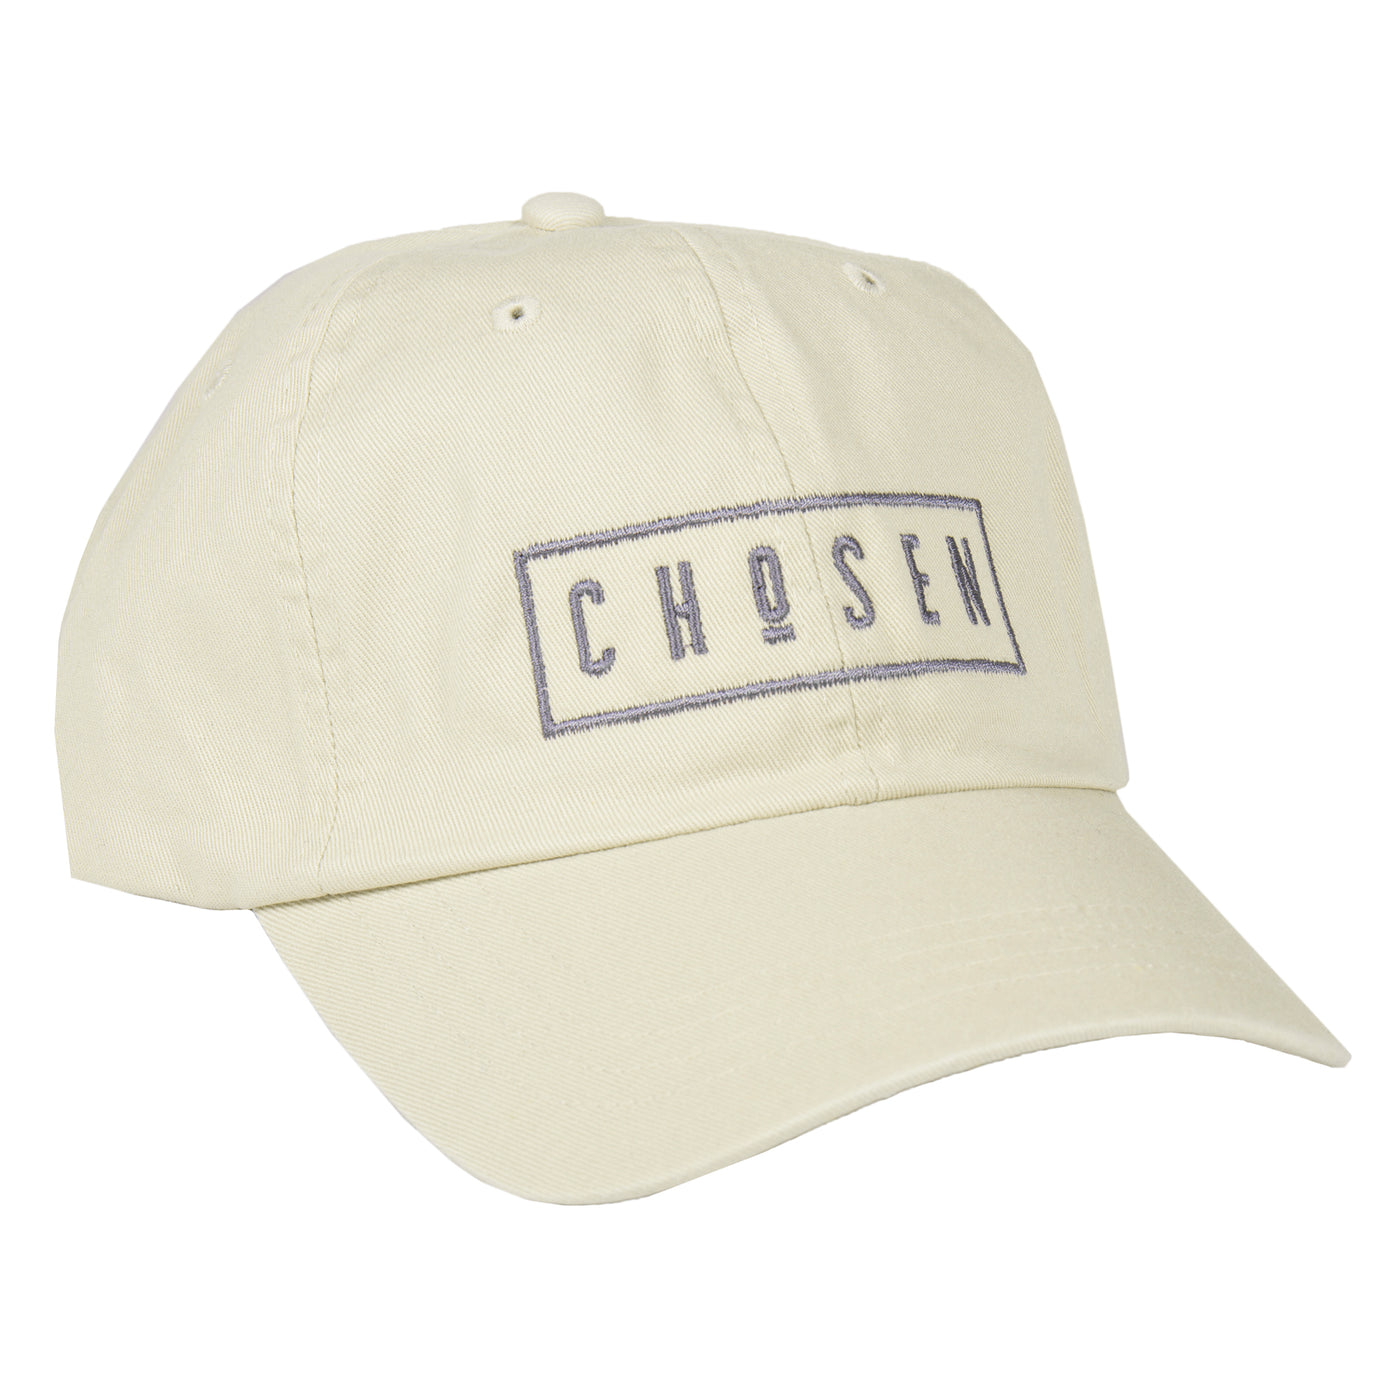 chosen adult baseball hat in cream color comfy and cozy